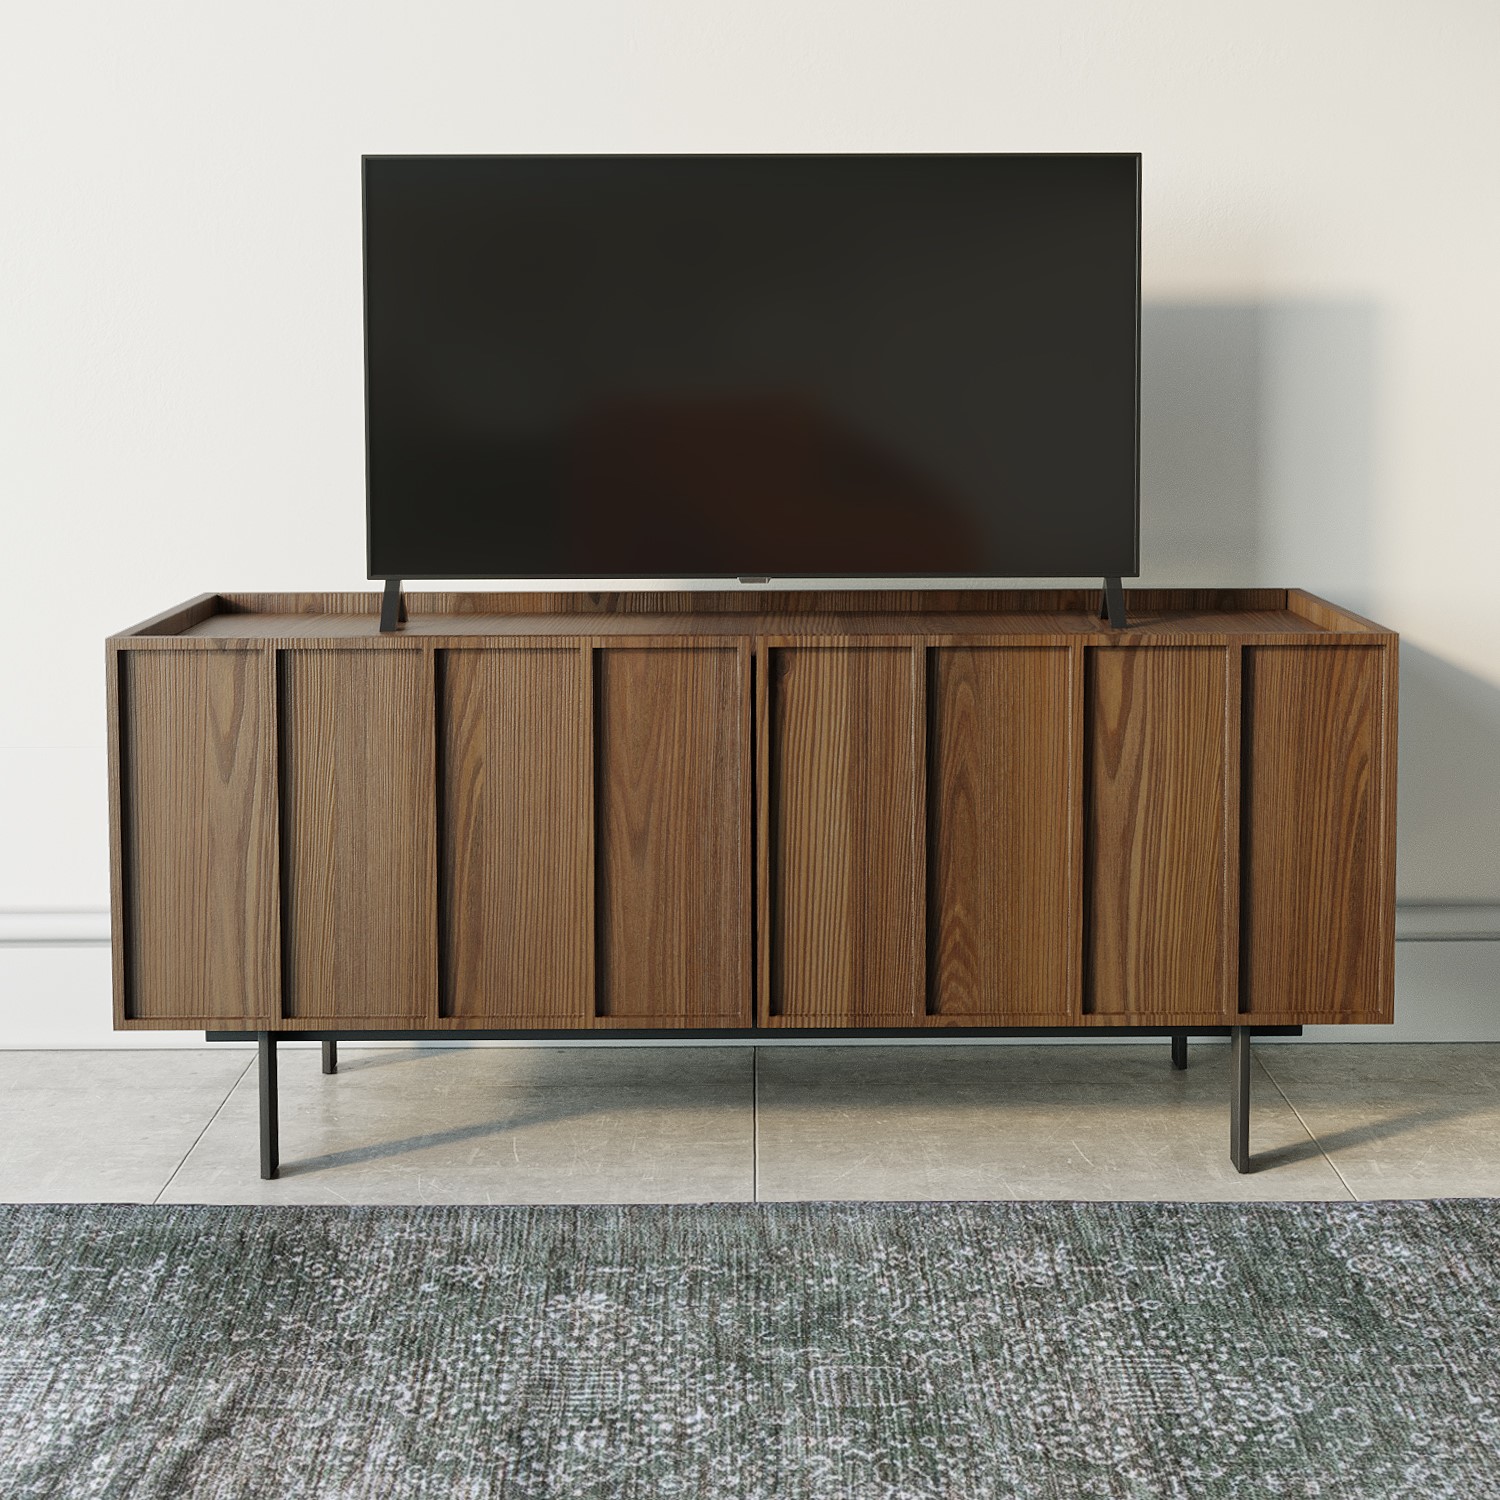 Read more about Small walnut tv stand with storage tvs up to 50 helmer